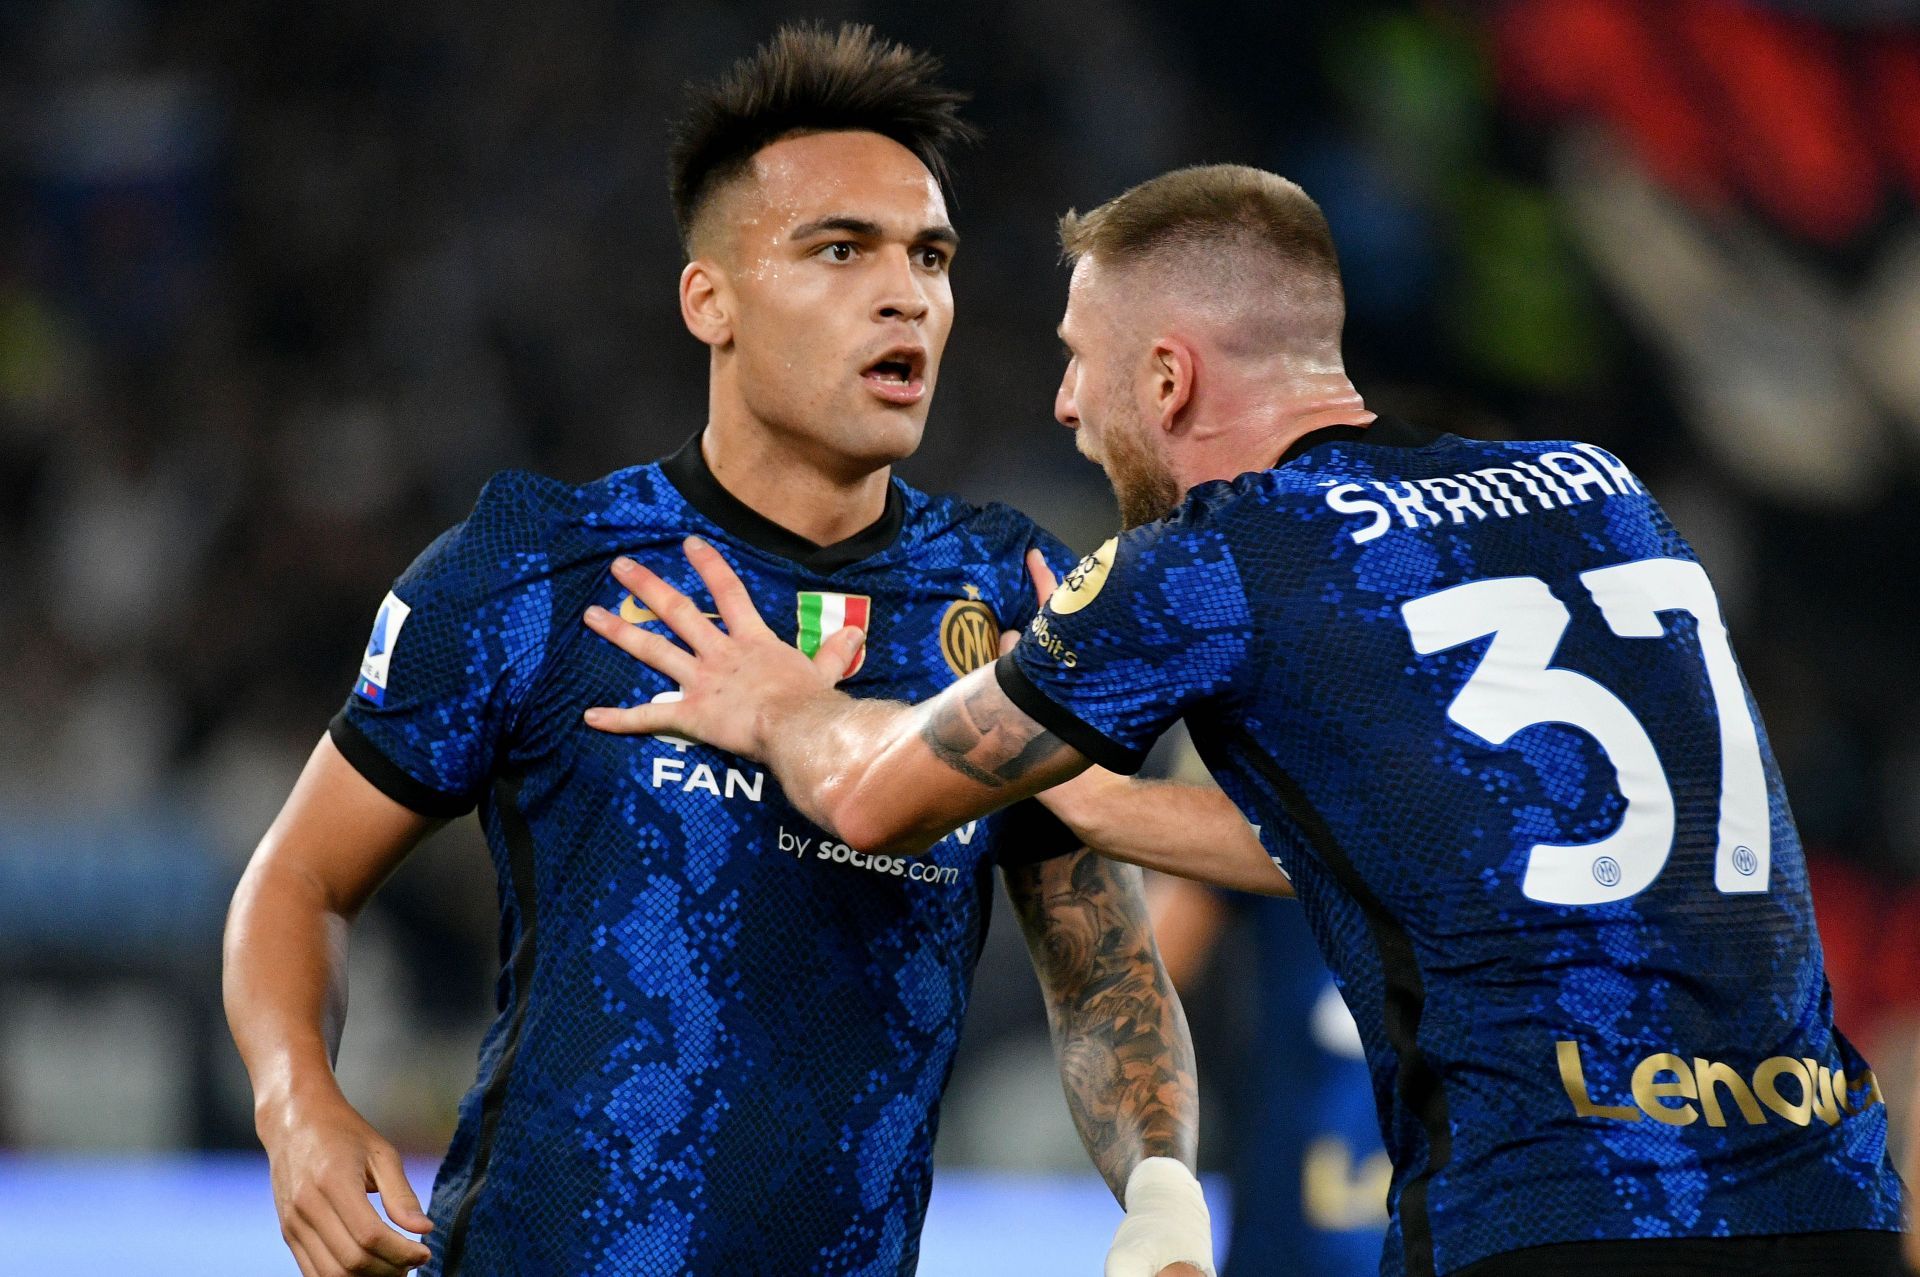 Arsenal have received a setback in their pursuit of Lautaro Martinez.